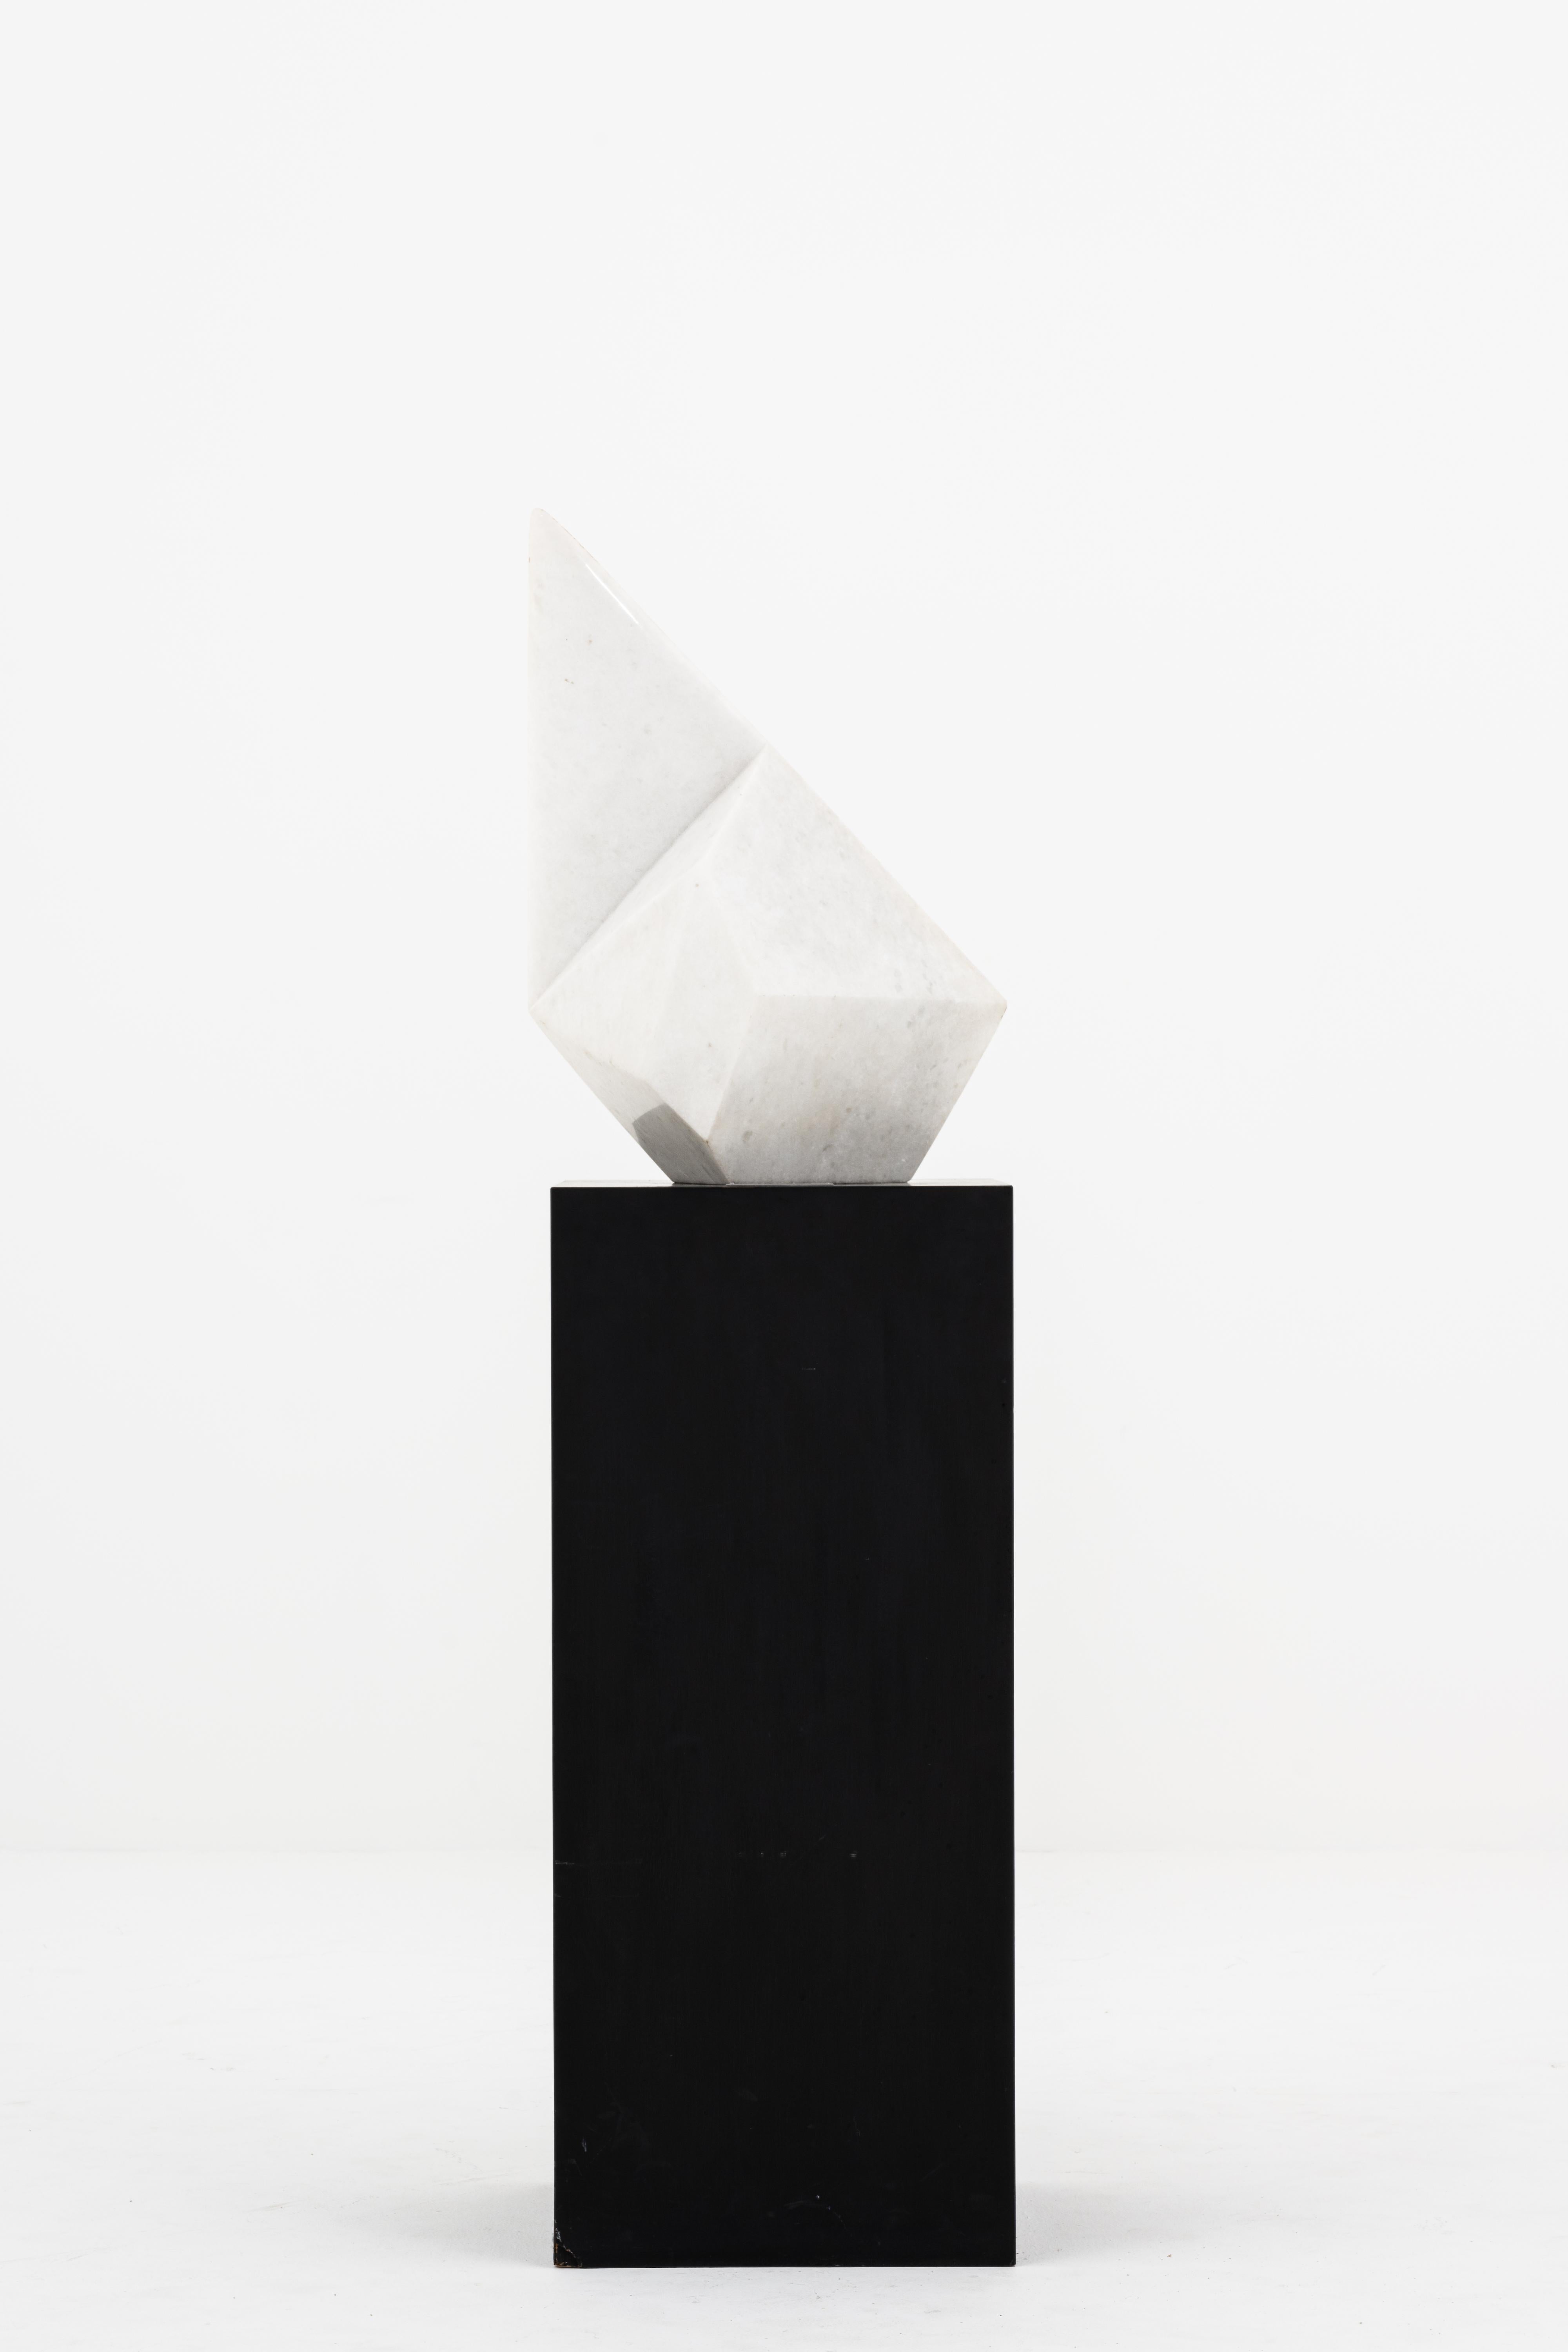 Emile Gilioli (1911 - 1977)
‘‘Astrale’’, 1966
White marble, base in black laquered wood
Sculpture : H. 63,5 x 29 x 39 cm / Base : H. 100 x 43 x 42,5 cm

At the height of the 20th century, Émile Gilioli was one of the foremost figures of the lyrical